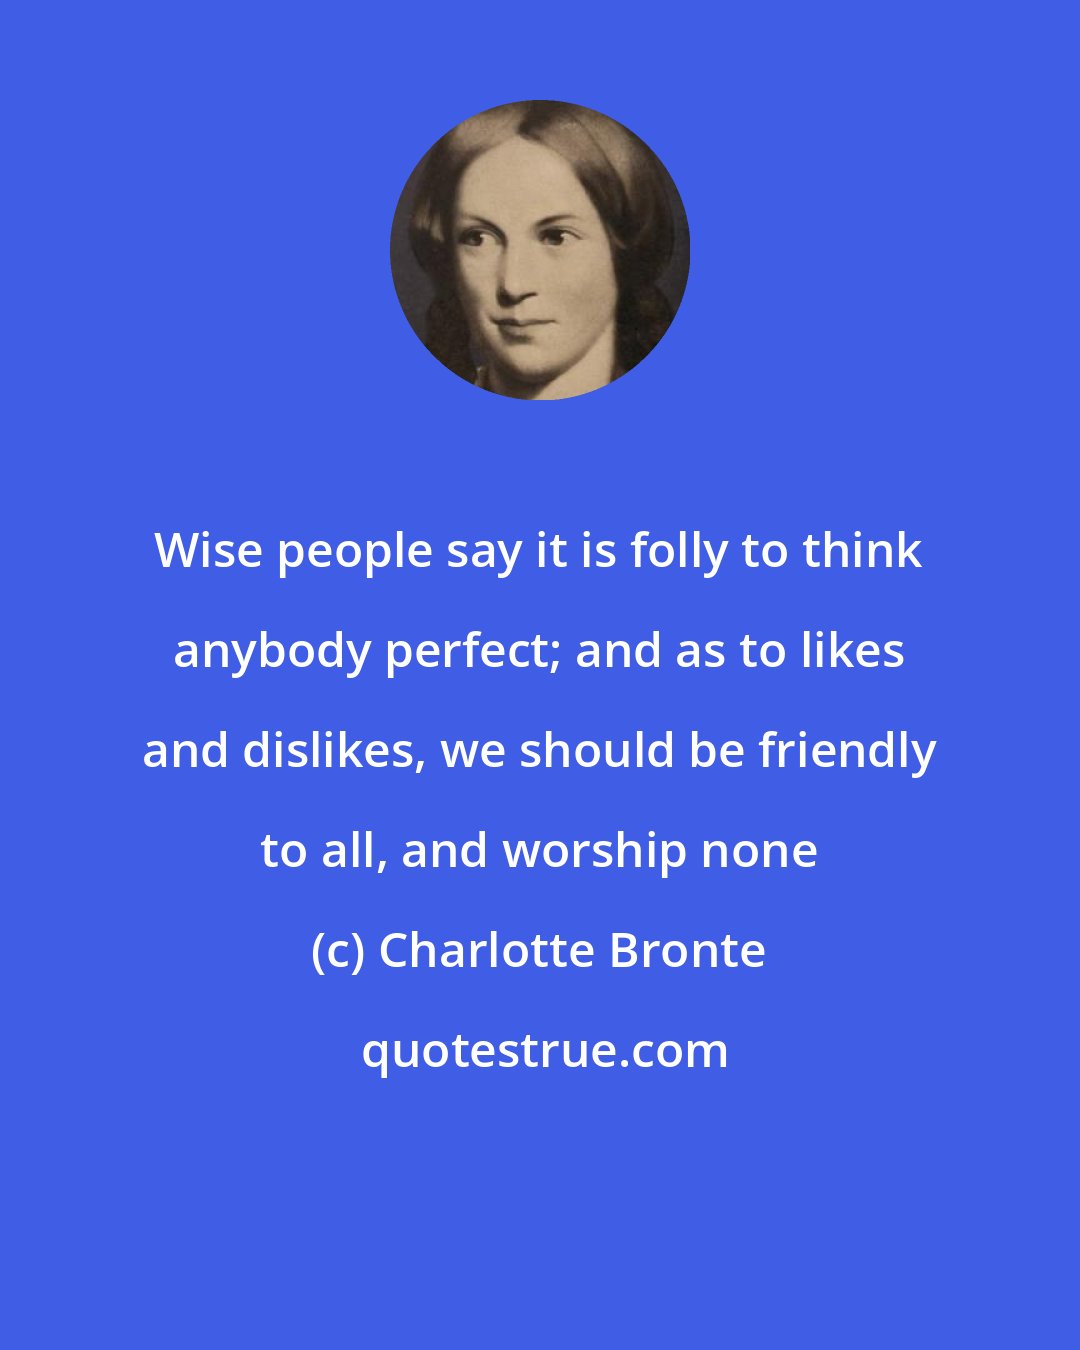 Charlotte Bronte: Wise people say it is folly to think anybody perfect; and as to likes and dislikes, we should be friendly to all, and worship none